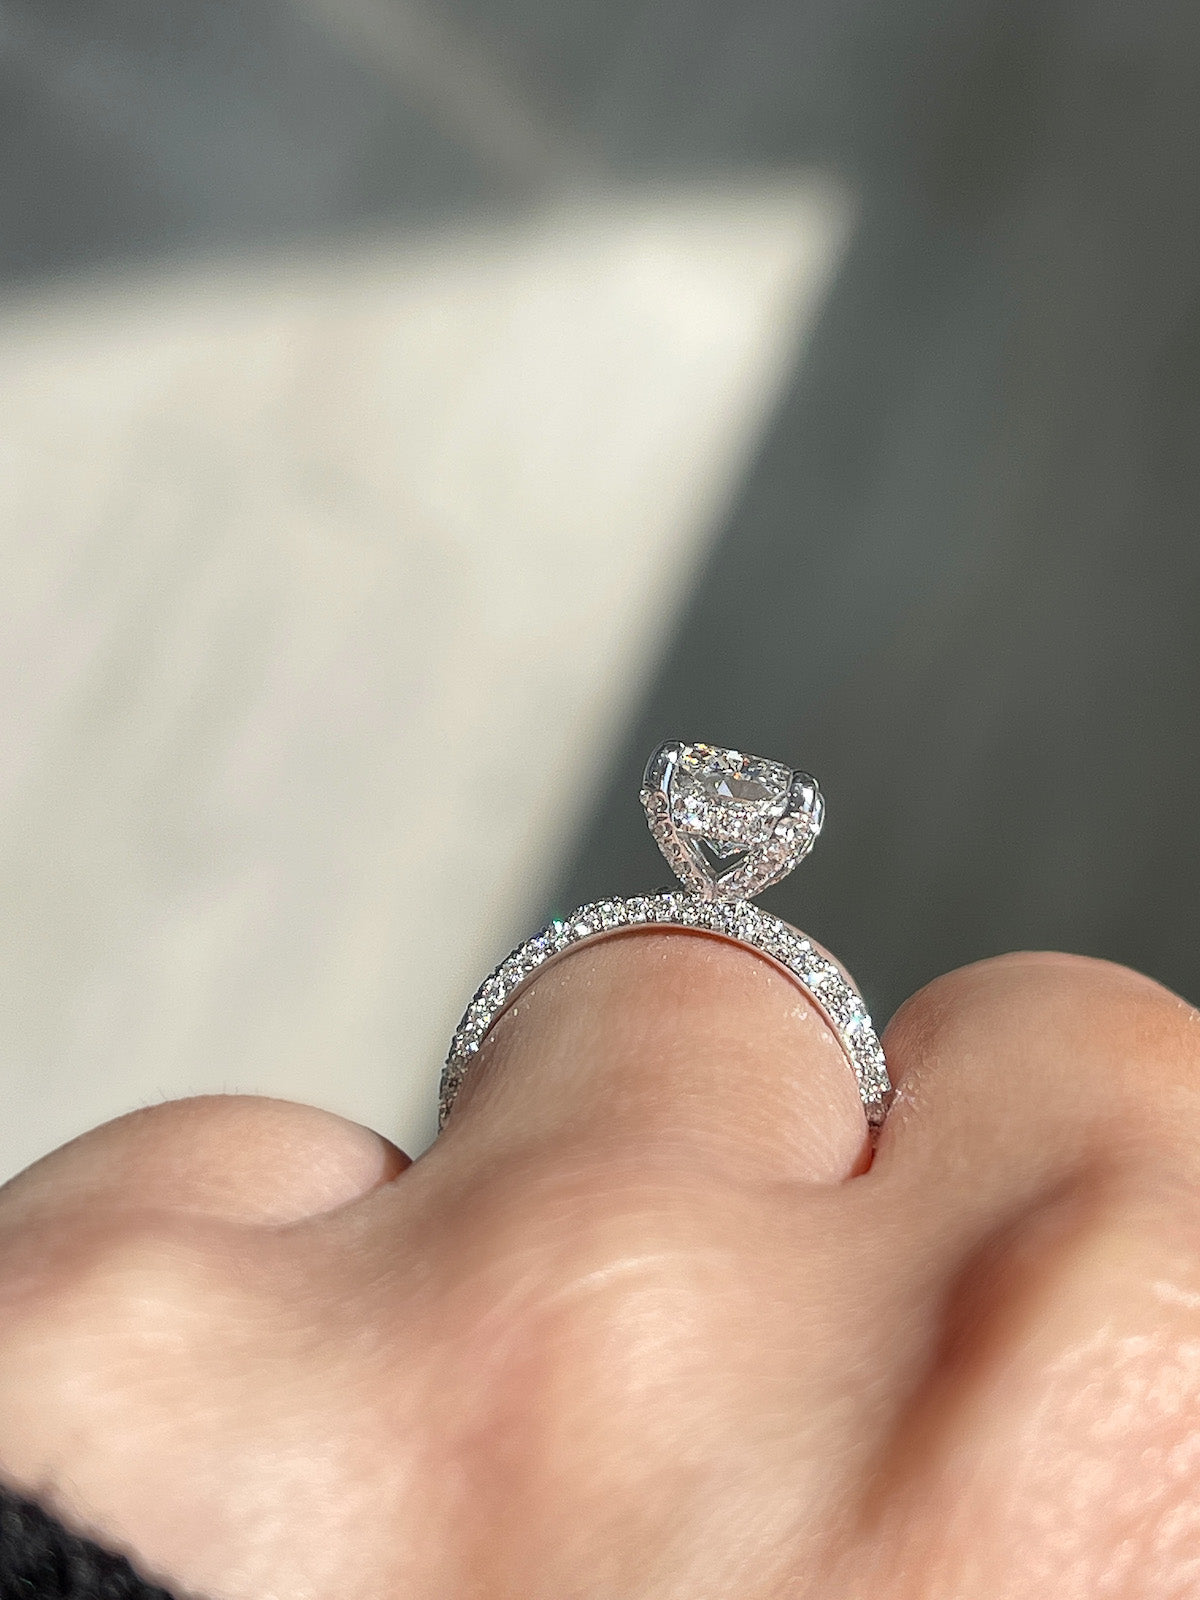 No More Lab-grown Diamond Engagement Rings for De Beers' Lightbox